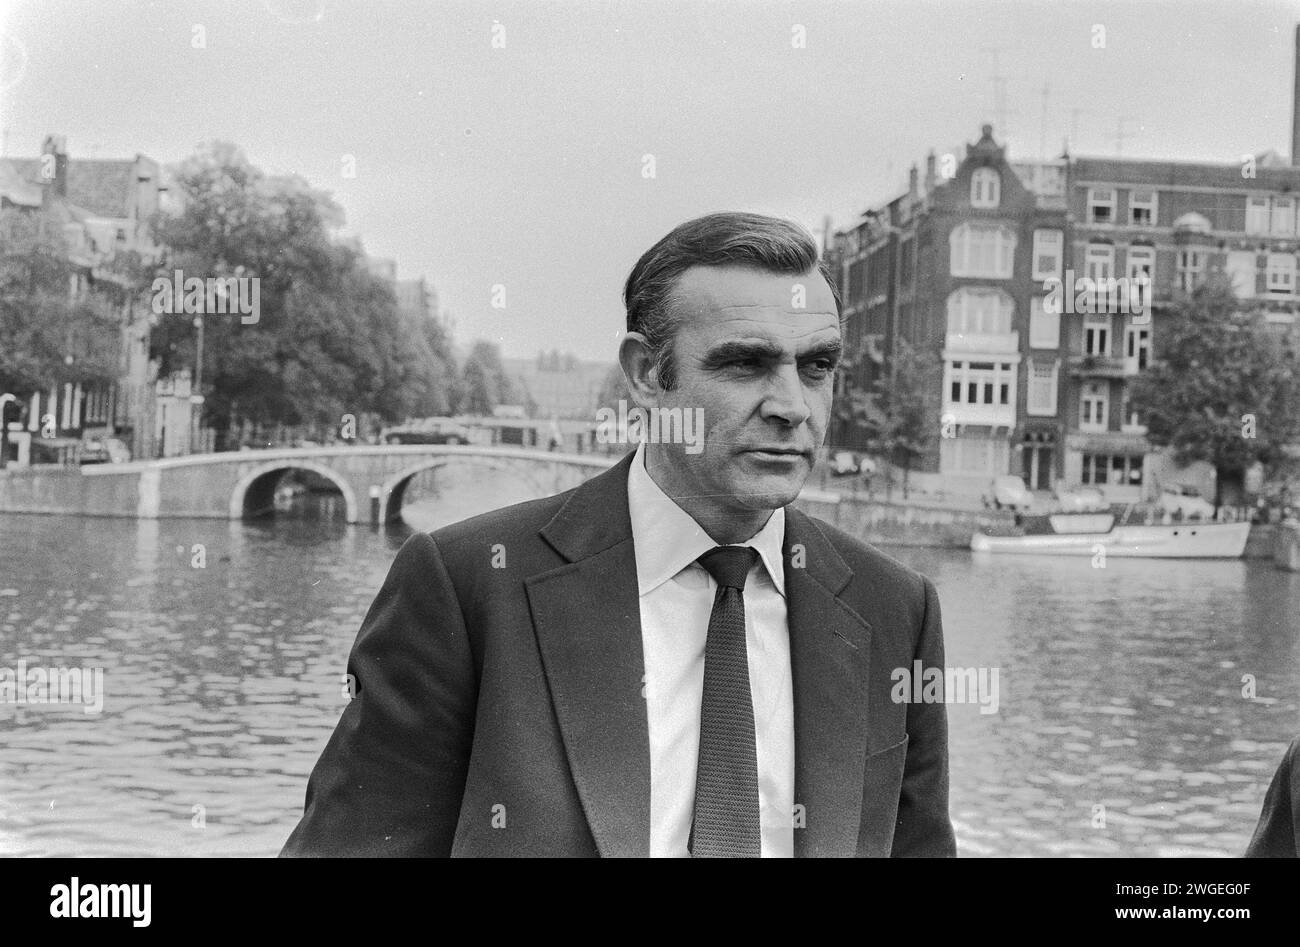 July 3, 1971. Amsterdam, Netherlands. Shooting in Amsterdam for the James Bond film 'Diamonds are Forever', Sean Connery by the Amstel river Stock Photo